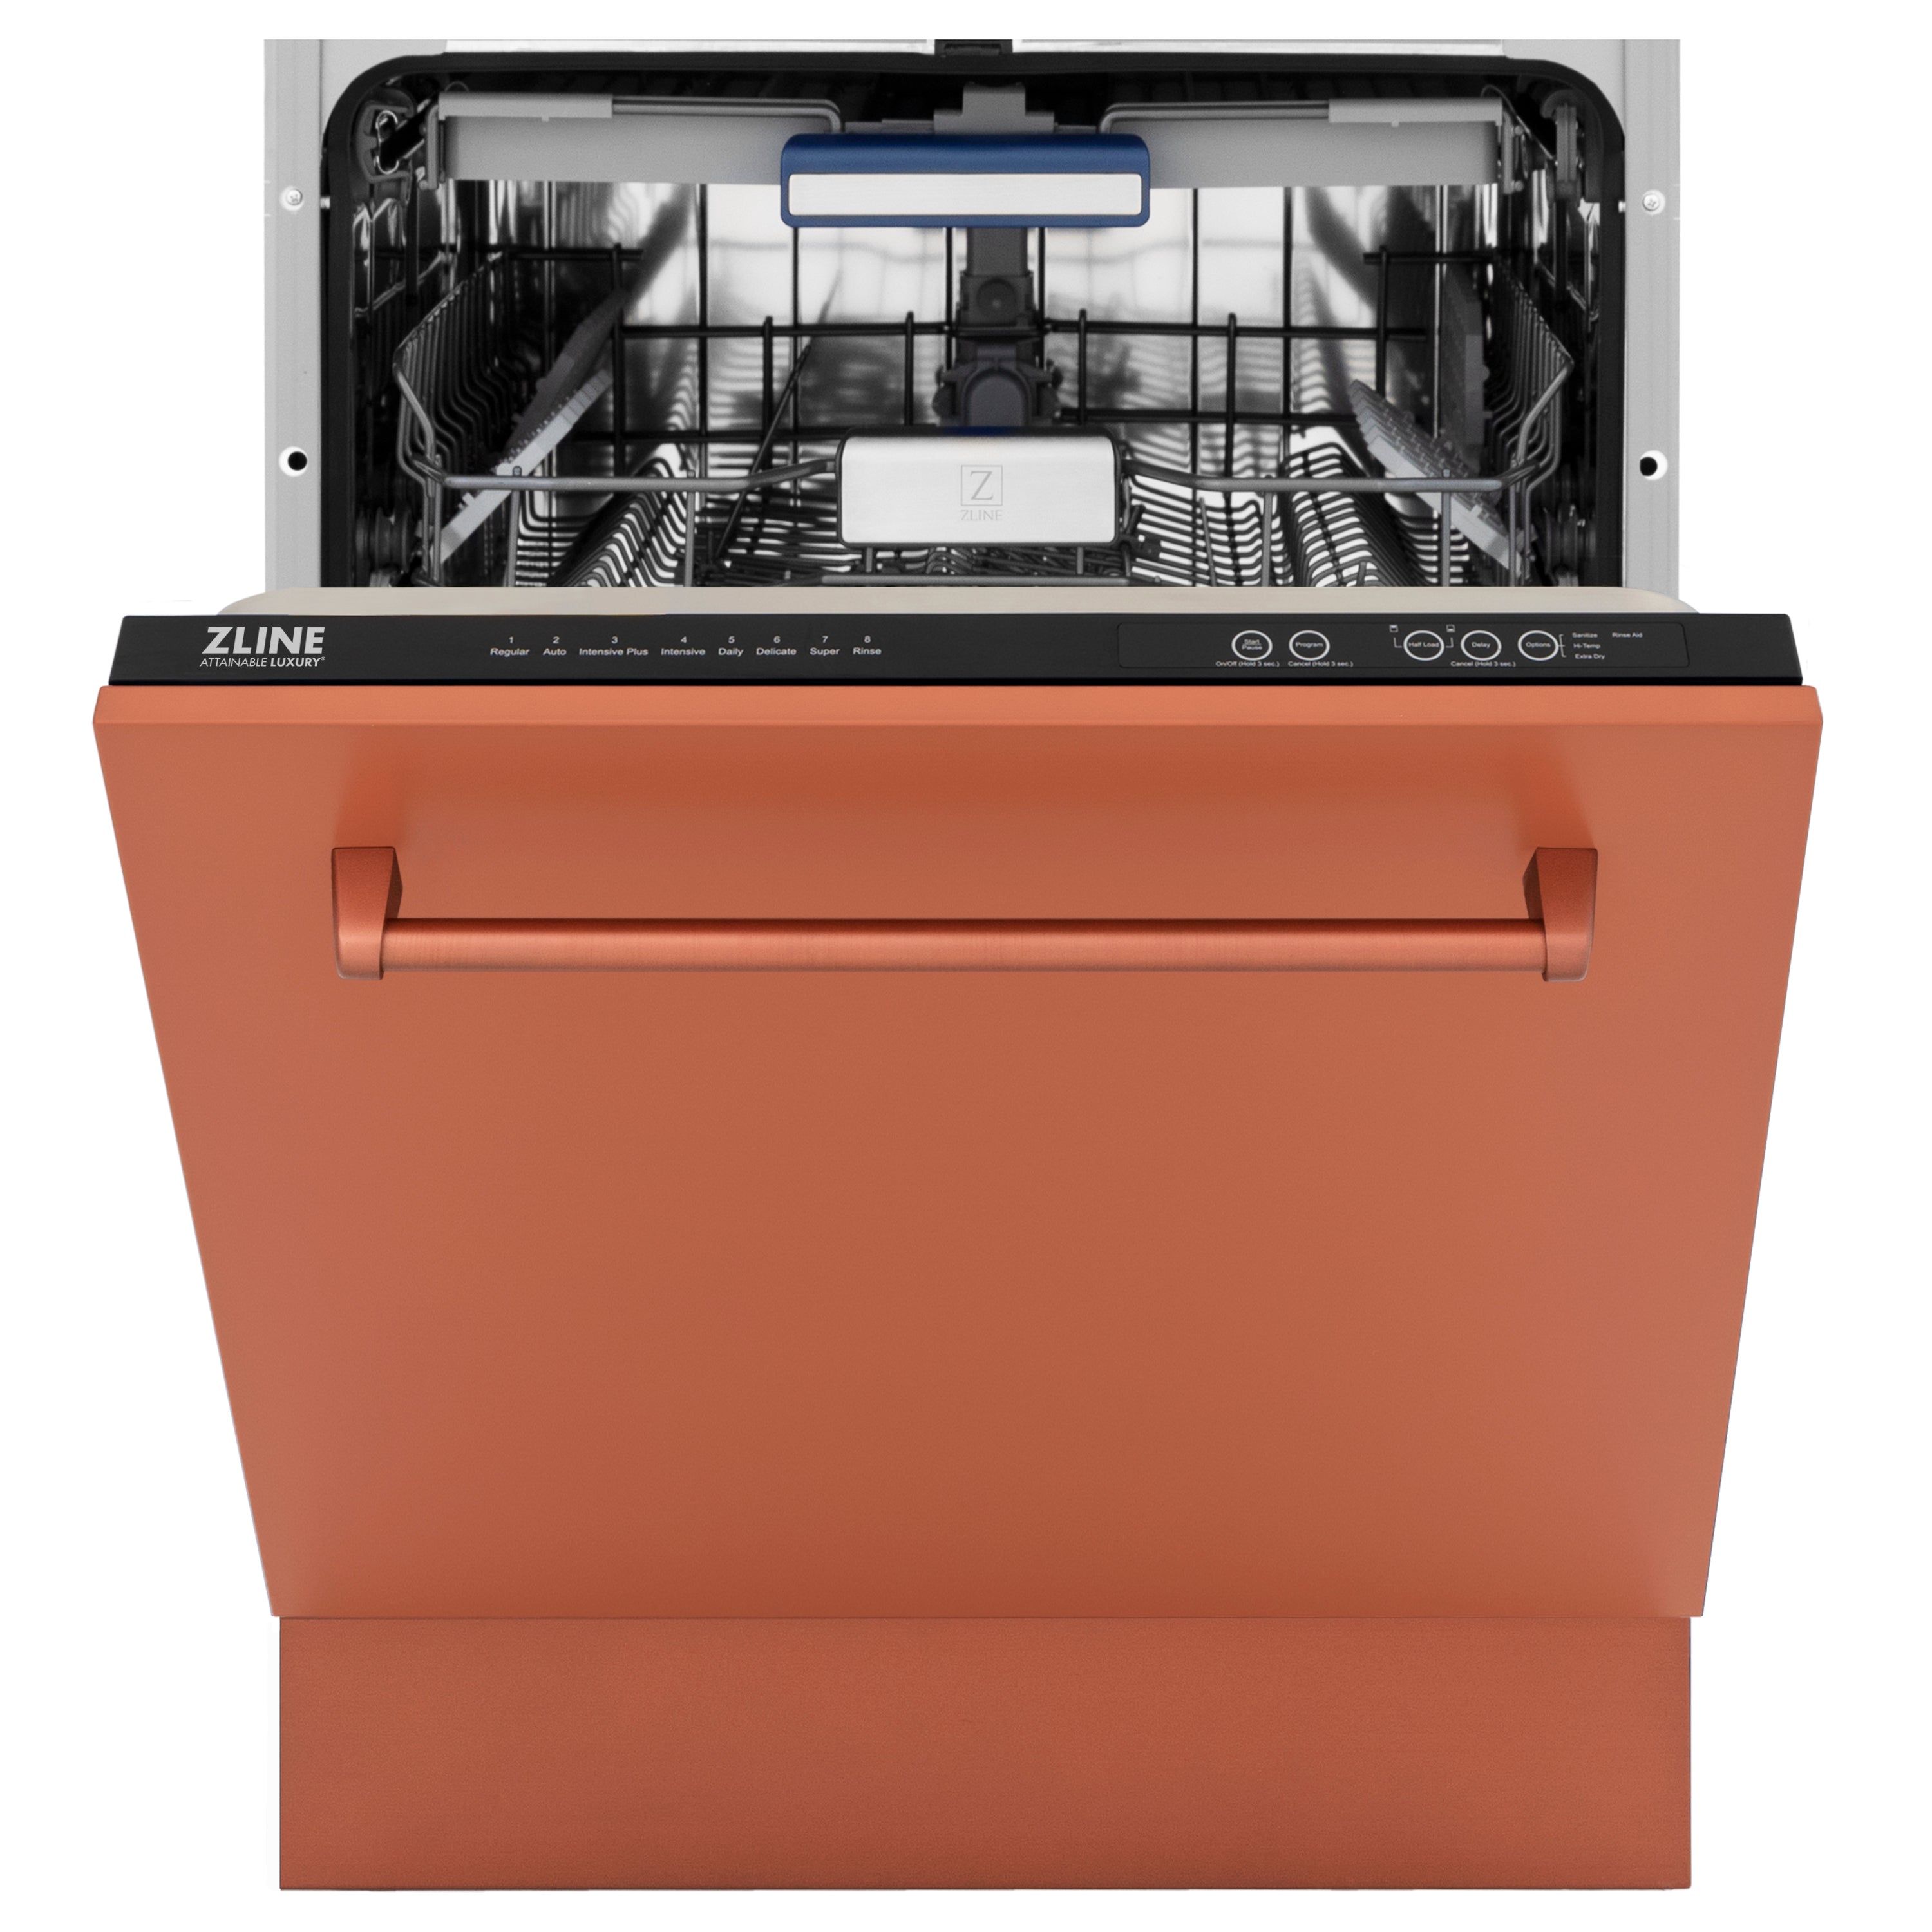 ZLINE 24" Tallac Series 3rd Rack Tall Tub Dishwasher in Copper with Stainless Steel Tub, 51dBa (DWV-C-24)